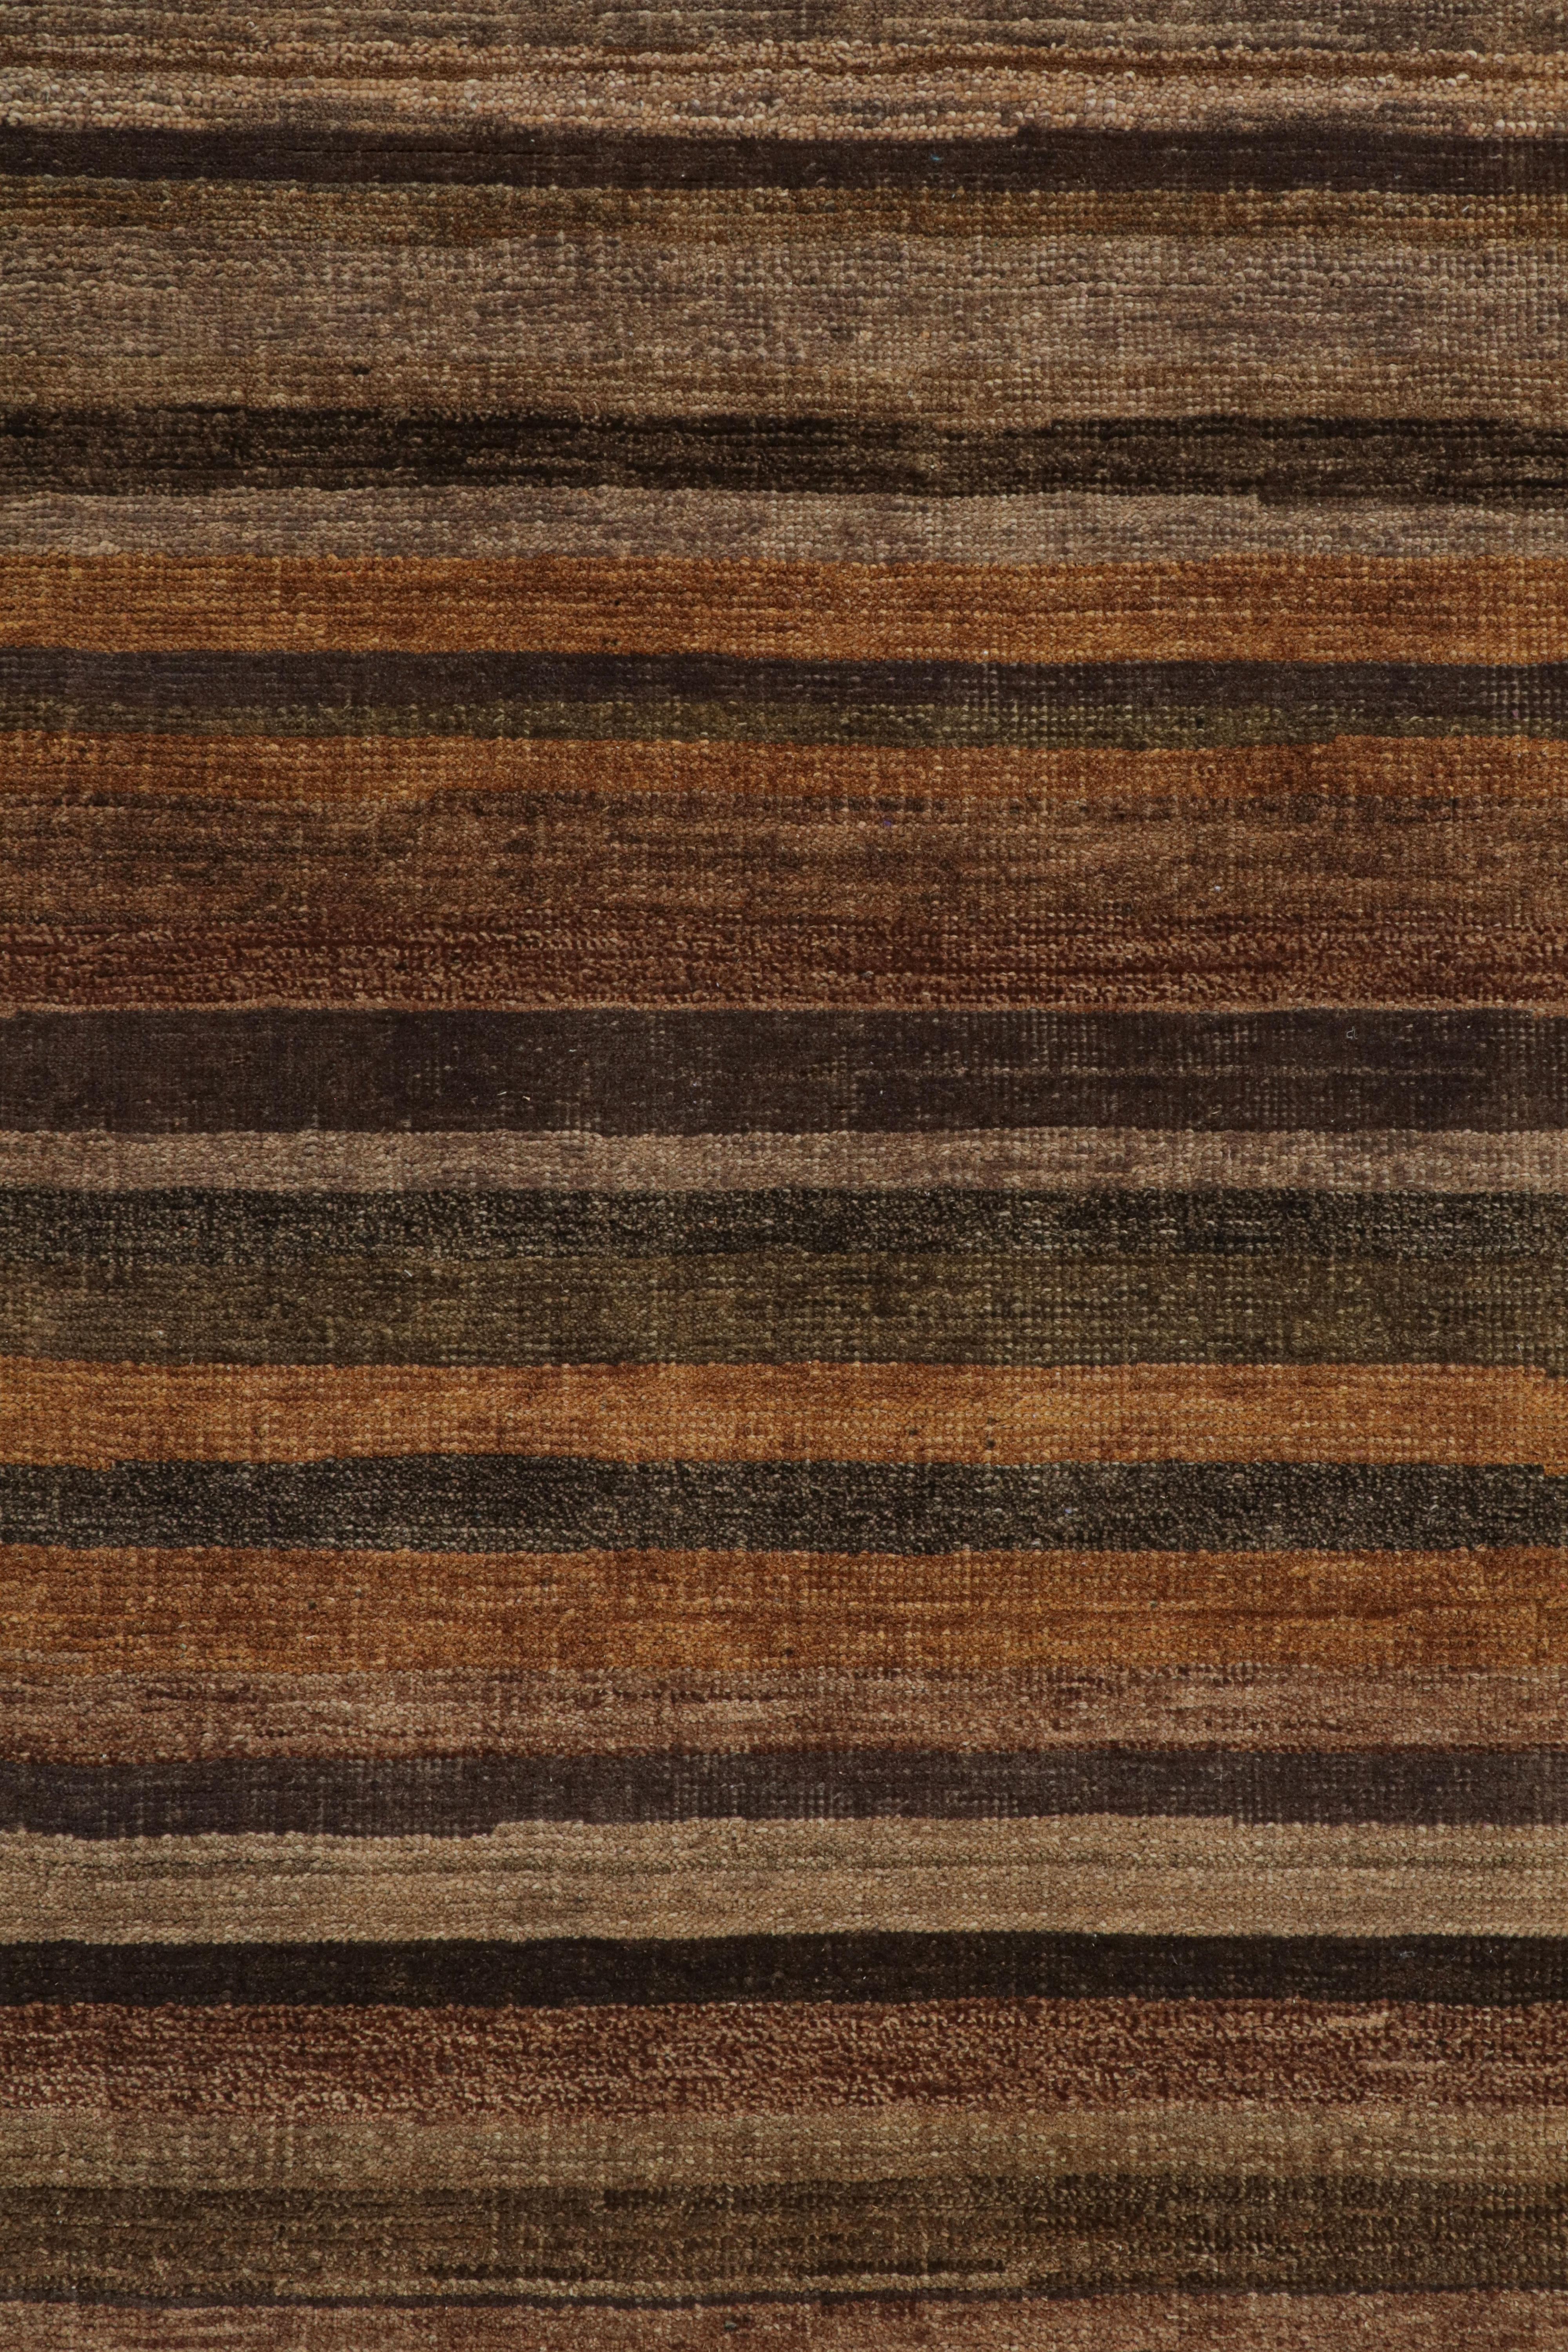 Modern Rug & Kilim’s Textural Rug in Beige-Brown Stripes and Striae For Sale